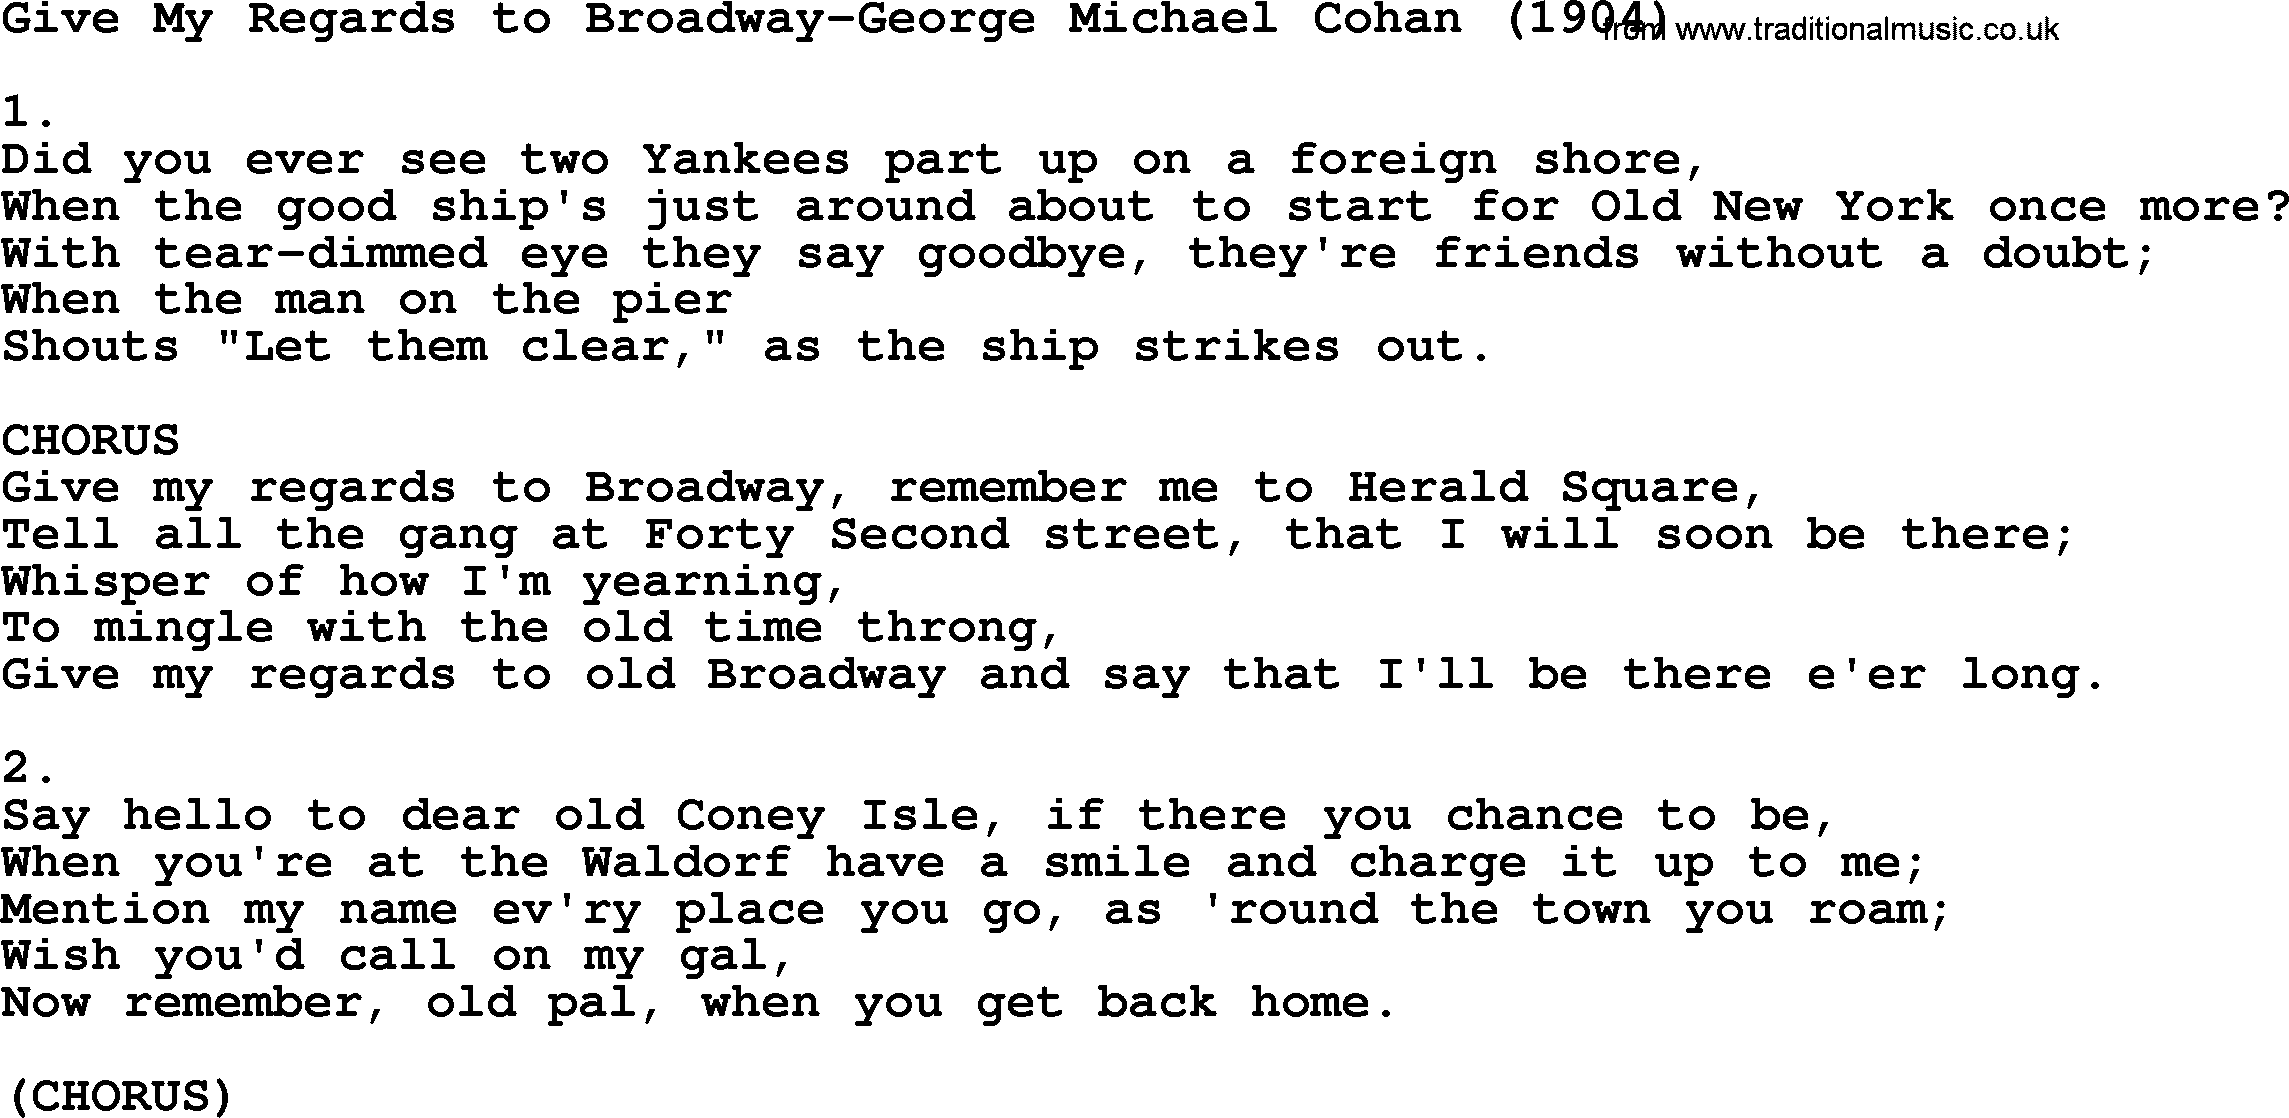 World War(WW1) One Song: Give My Regards To Broadway-George Michael Cohan 1904, lyrics and PDF